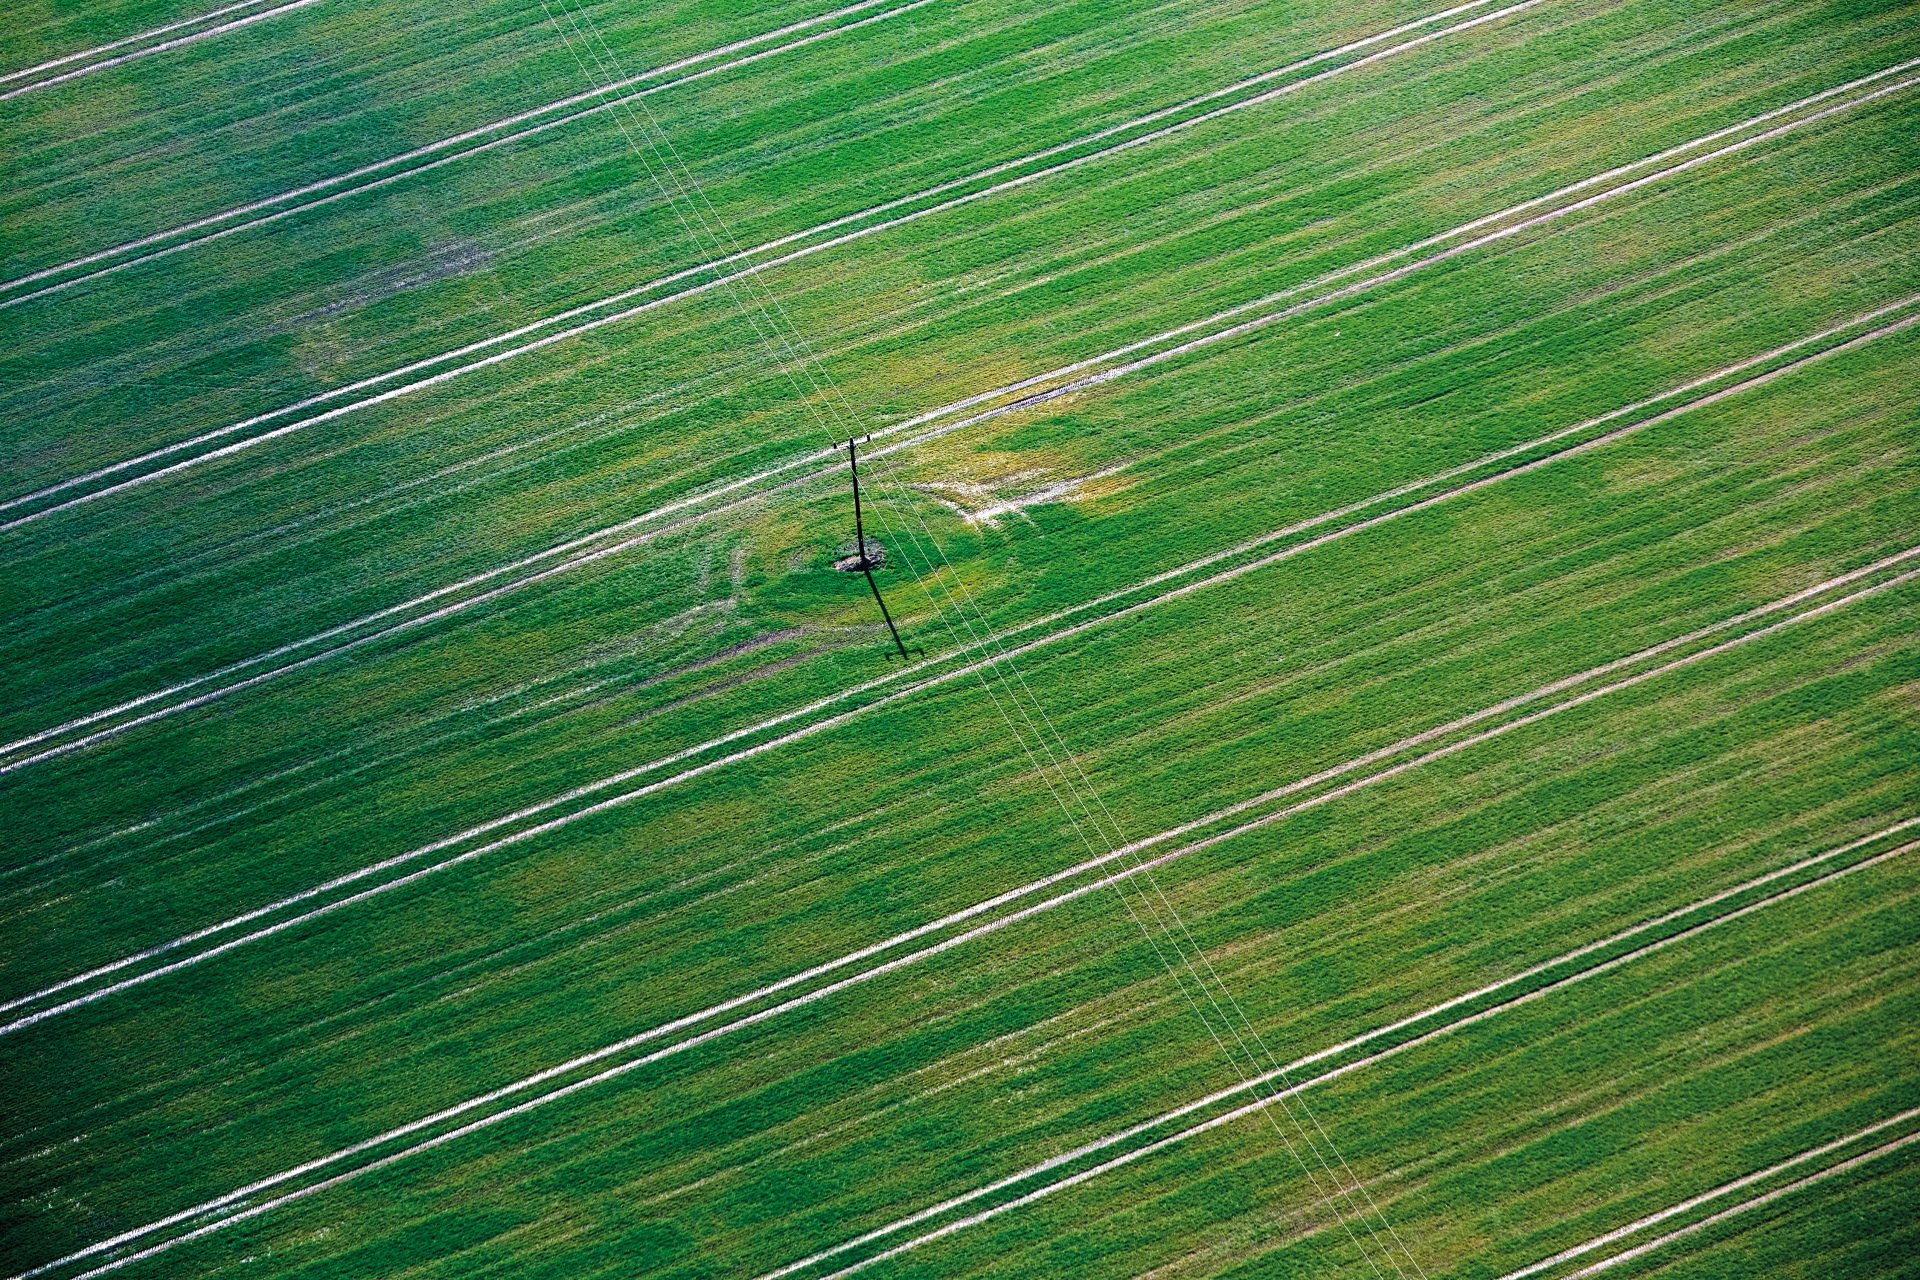 Birds eye view of green fields and pylons